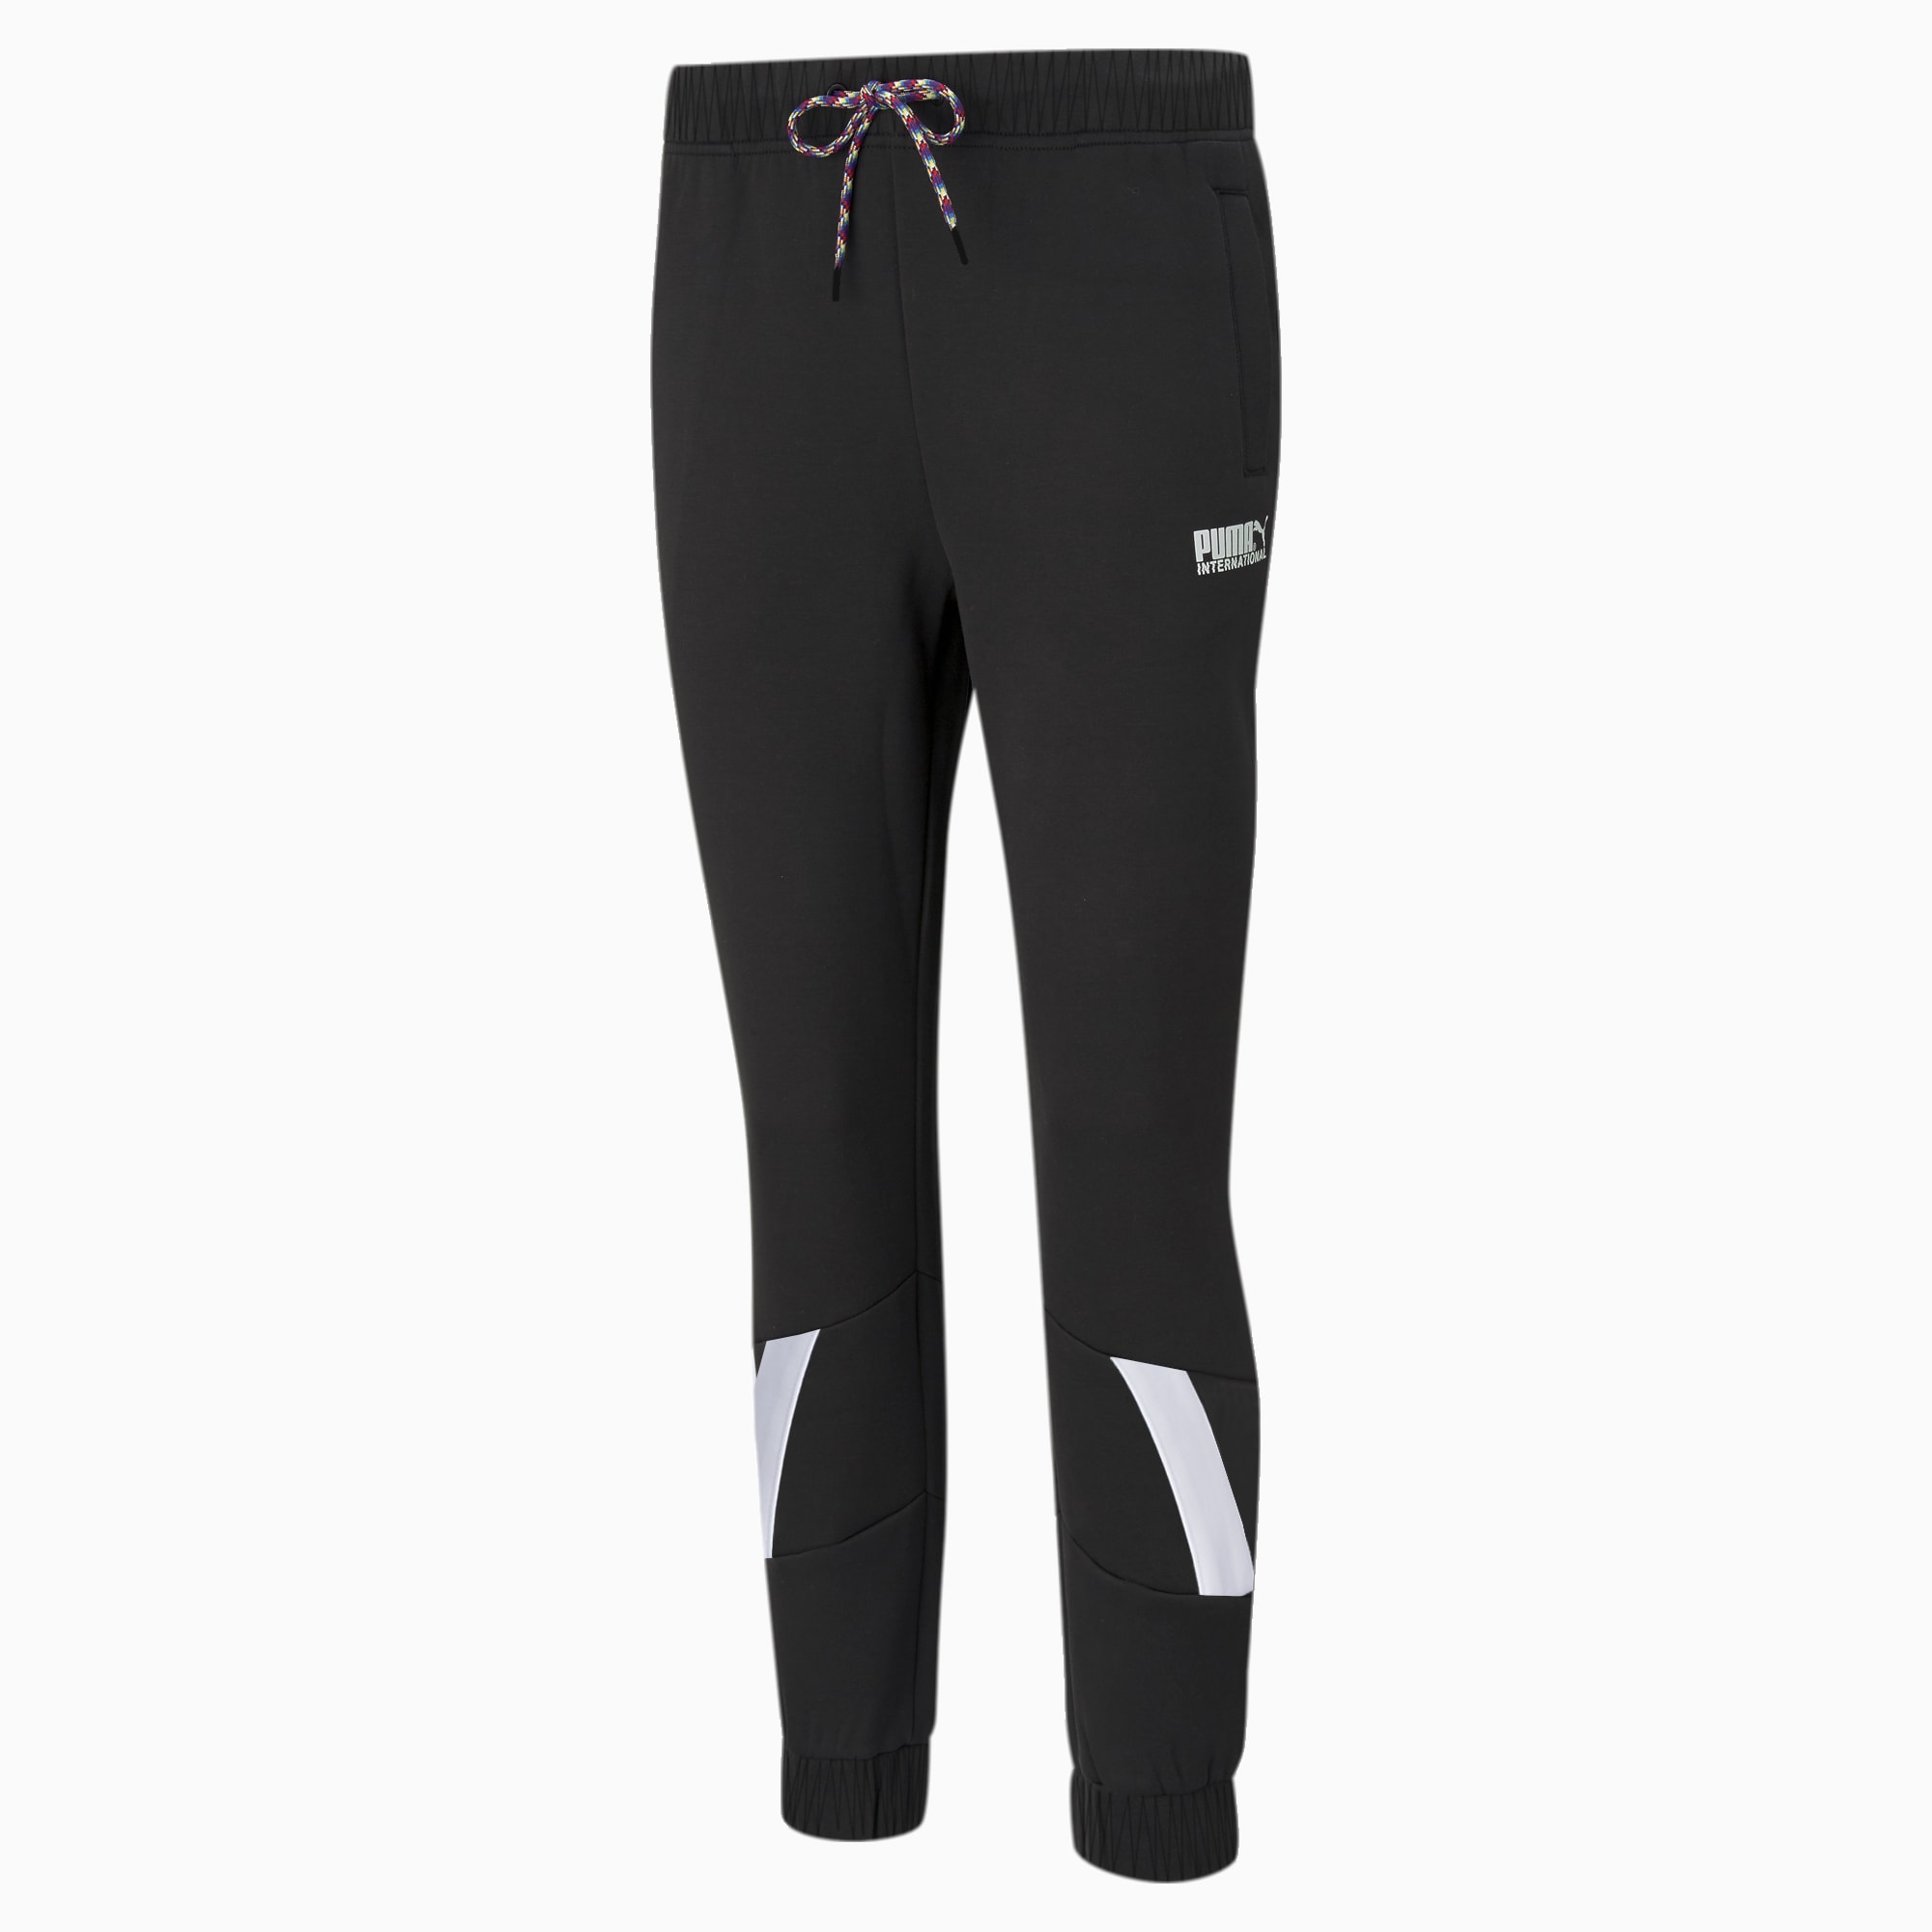 Cukoo Active Wear: Black Workout/Track Pants for Women(PINK